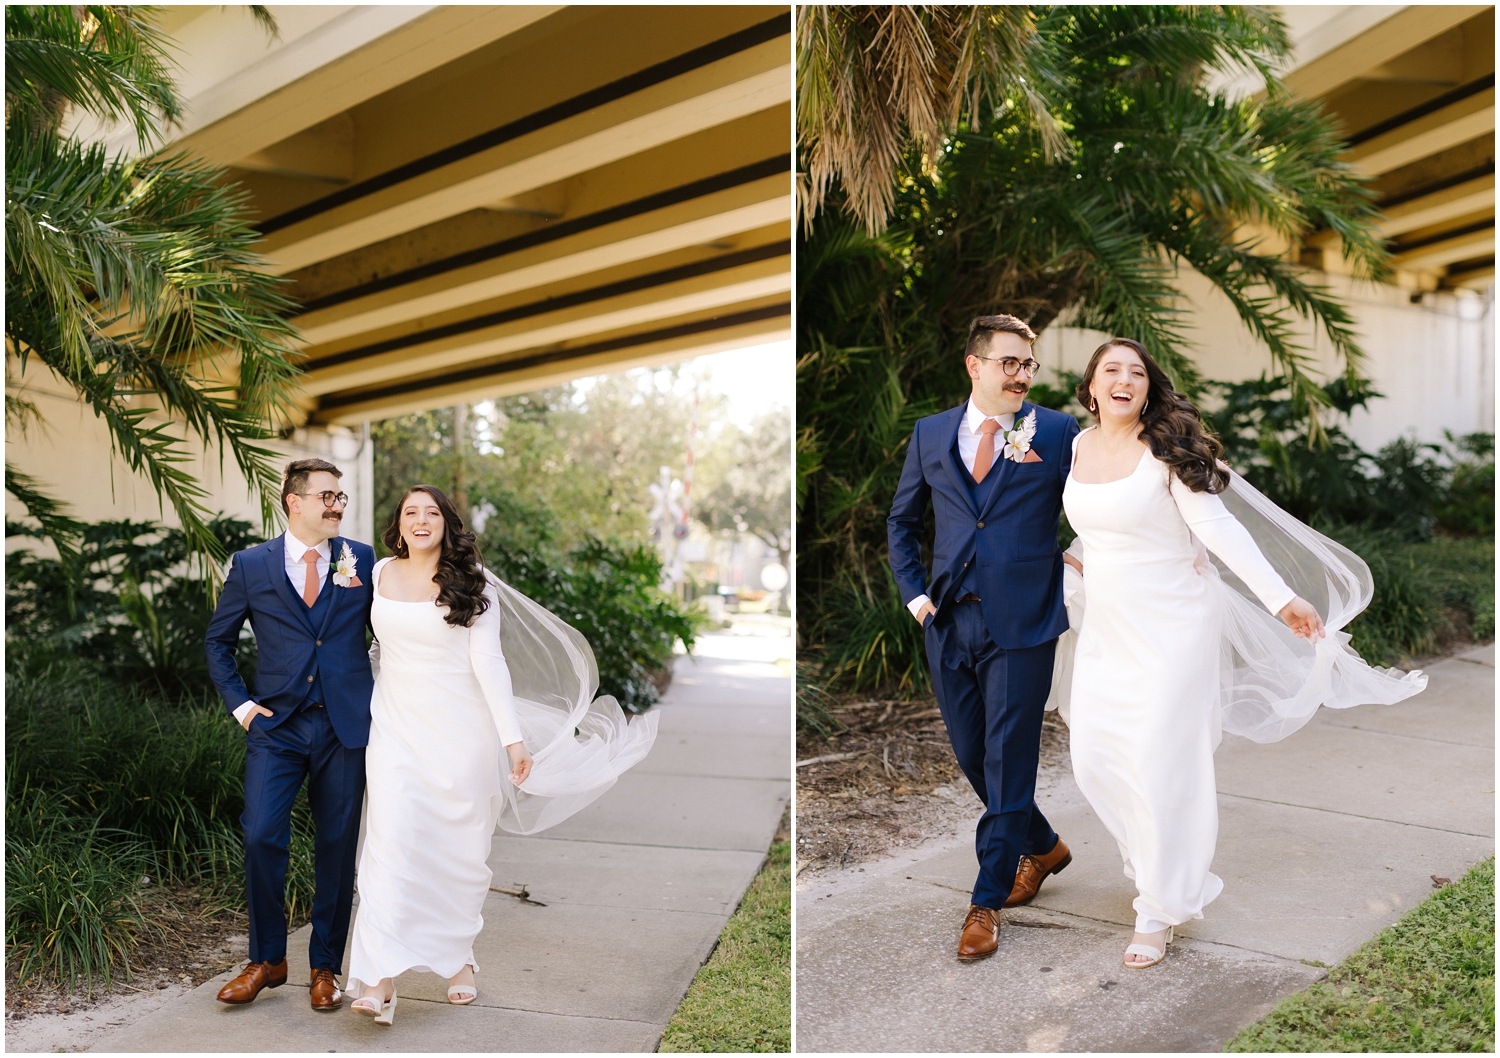 candid image of a couple walking together on their wedding day in South Tampa, FL